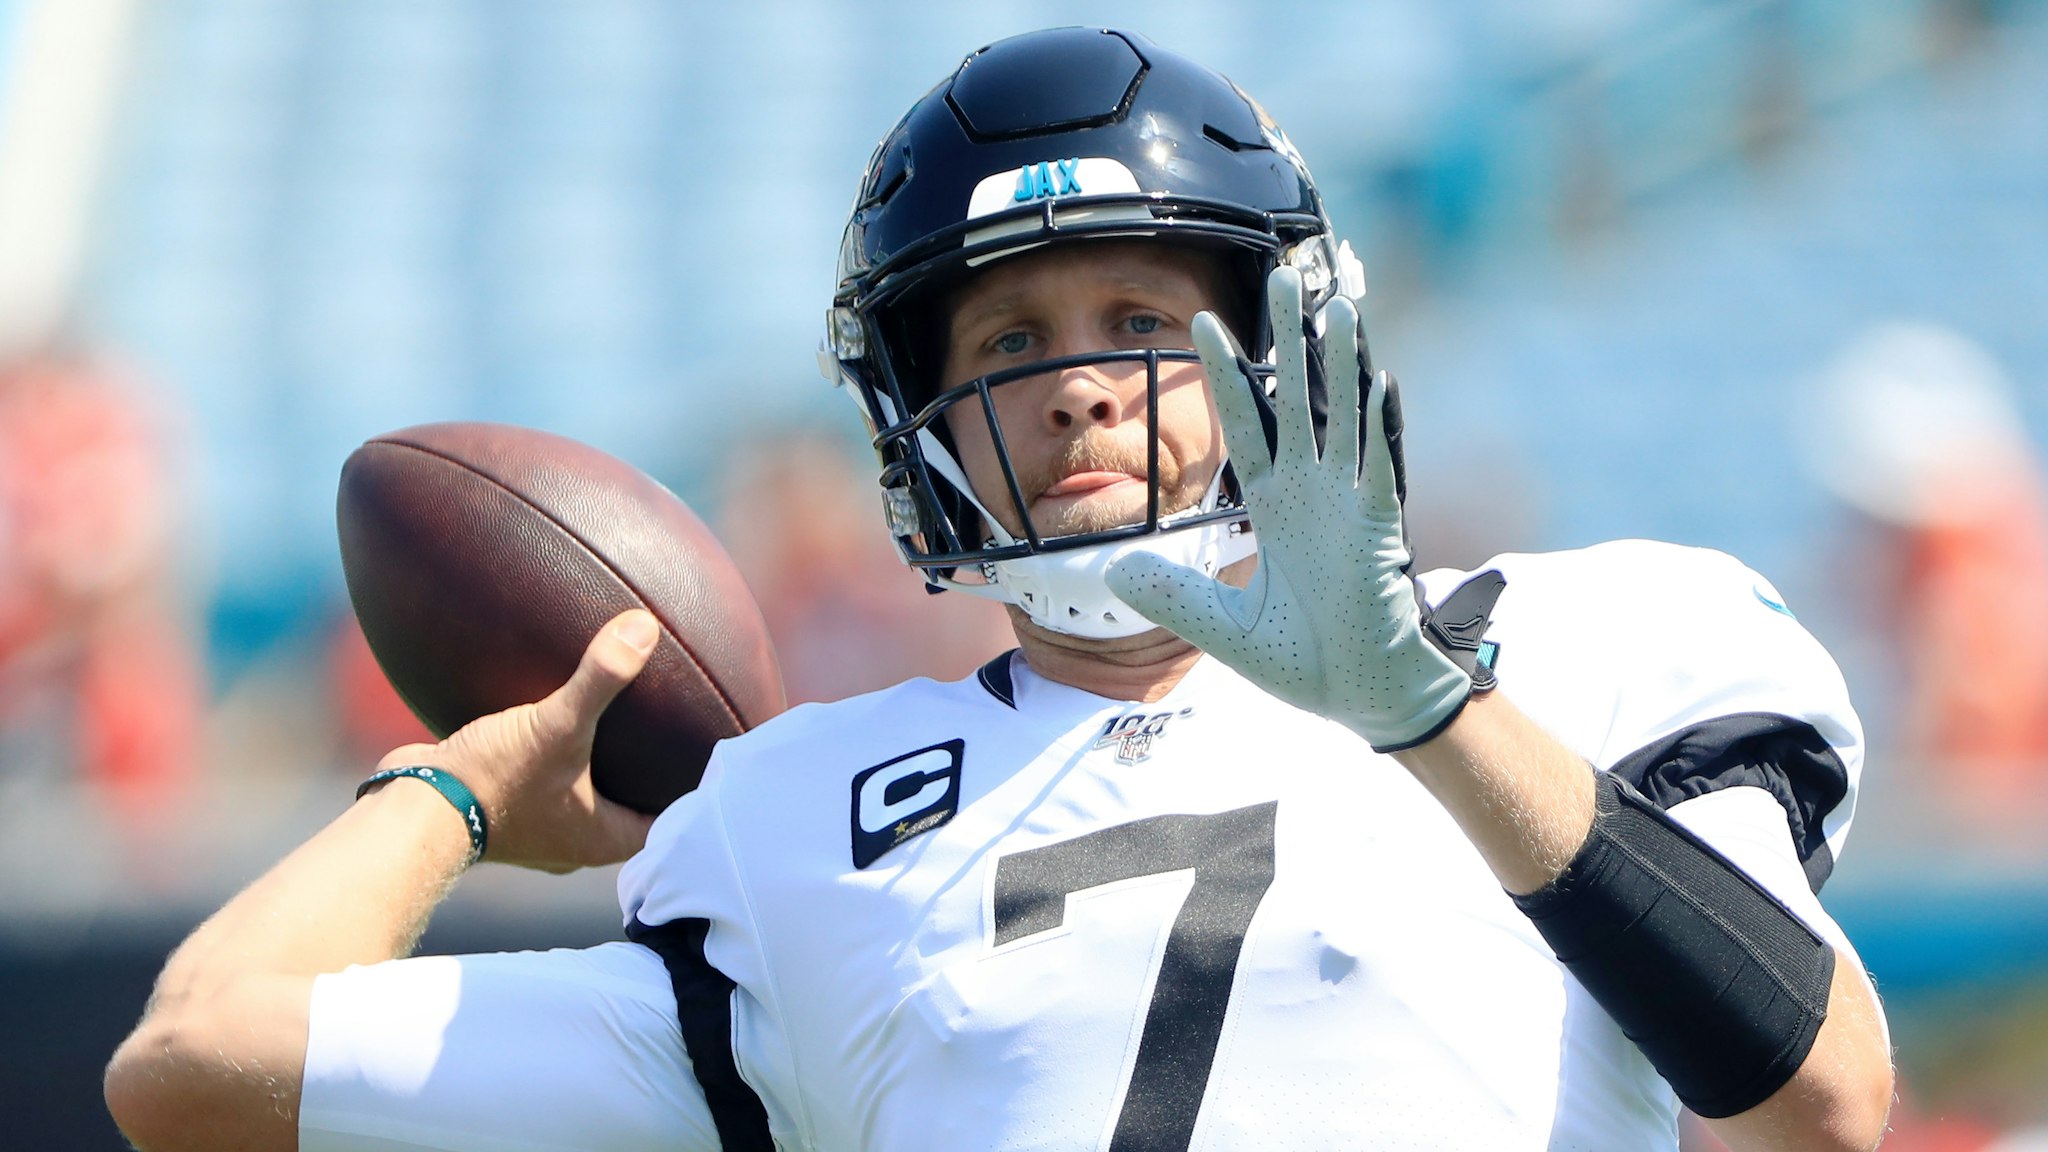 Quarterback Nick Foles #7 of the Jacksonville Jaguars warms up prior to their game against the Kansas City Chiefs at TIAA Bank Field on September 08, 2019 in Jacksonville, Florida.